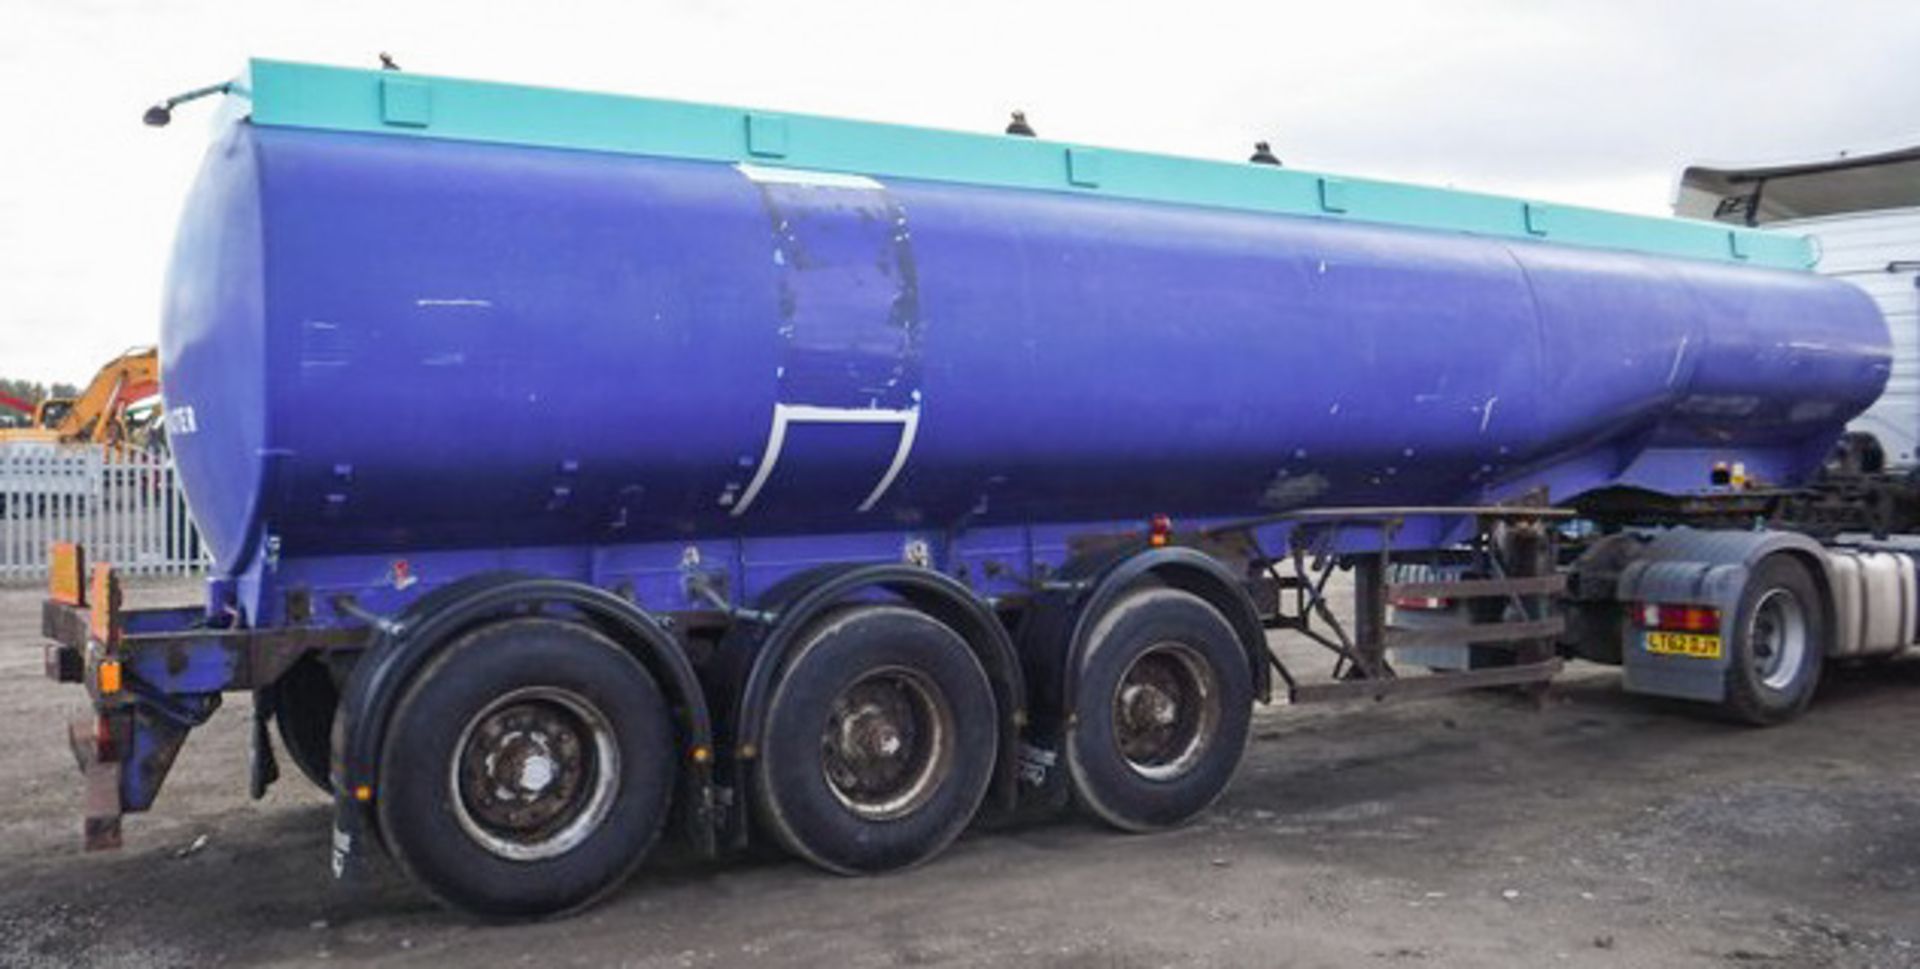 1985 FRUEHAUF WATER TANKER, CHASSIS NO - FT138807, TWIN AXLE, GROSS WEIGHT 32000KGS - Image 5 of 14